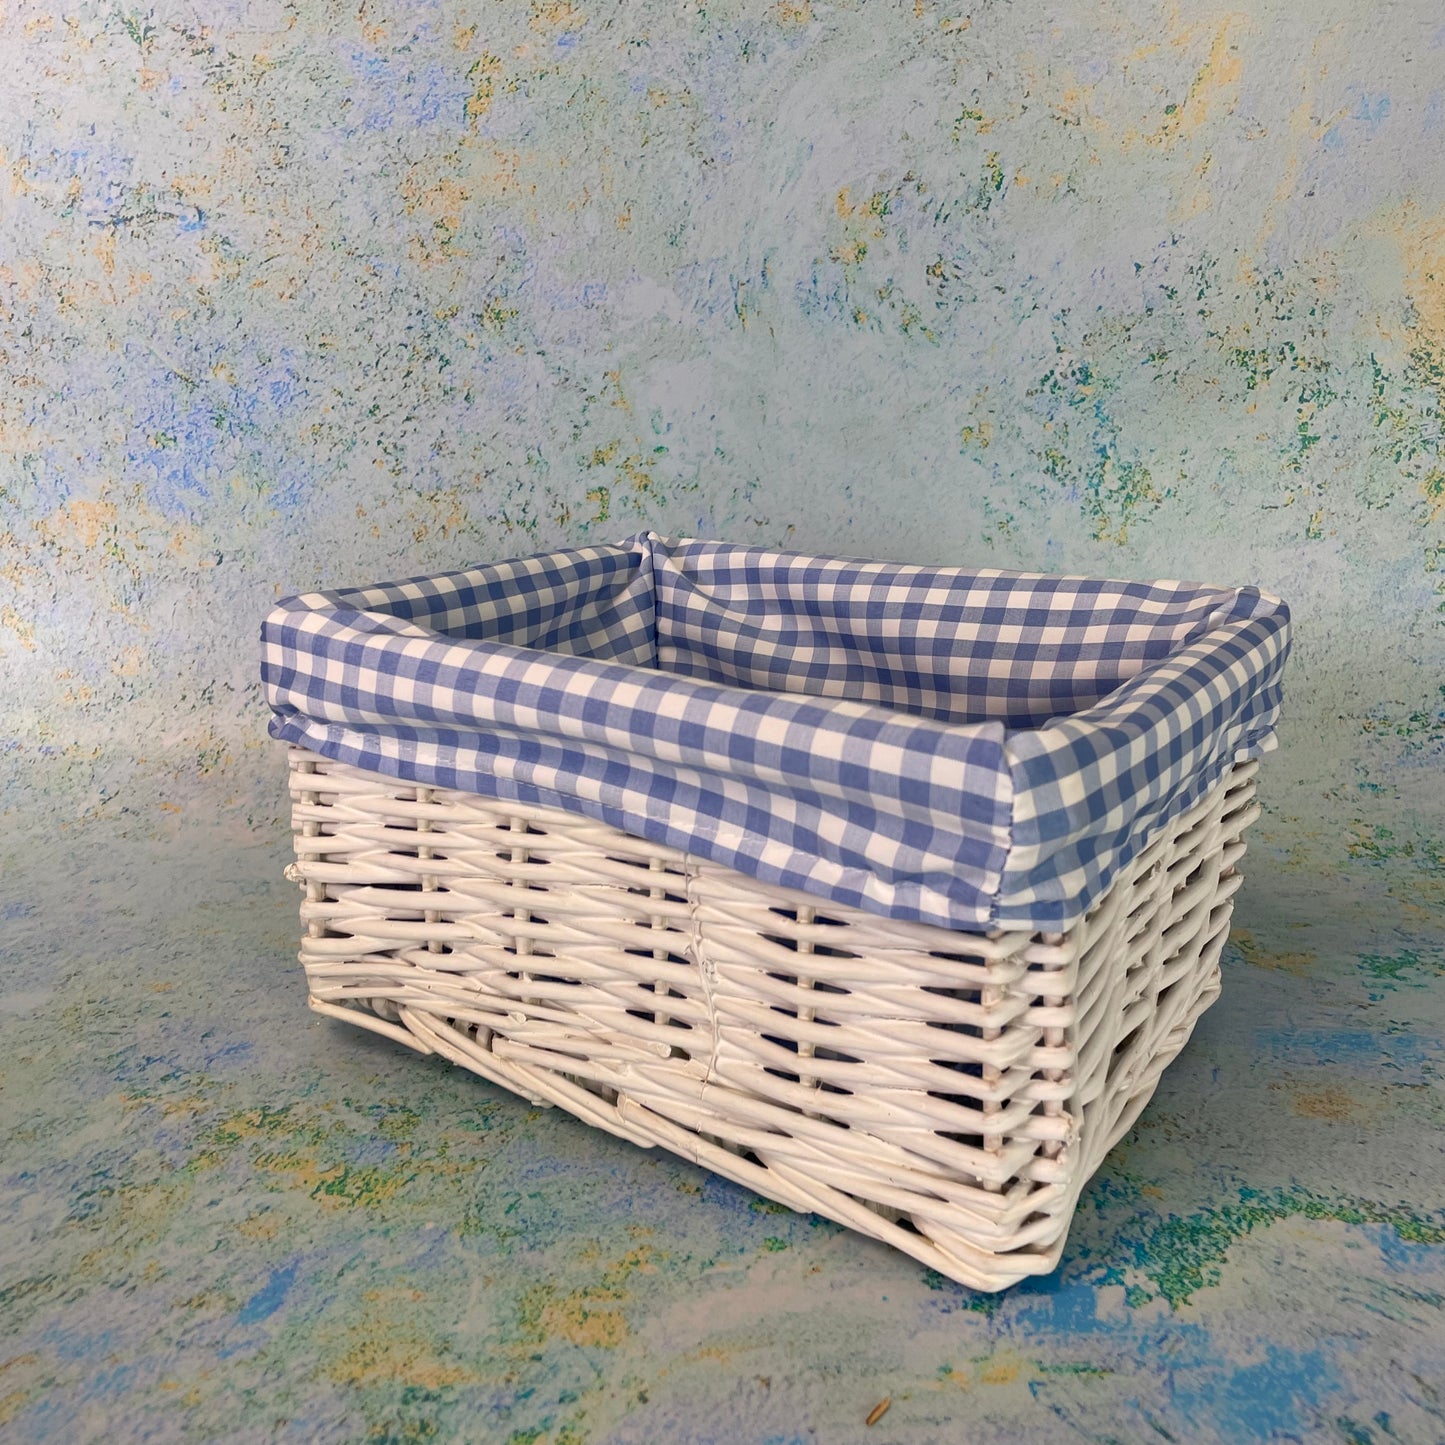 New Baby Gift Basket Kit with Blue Gingham